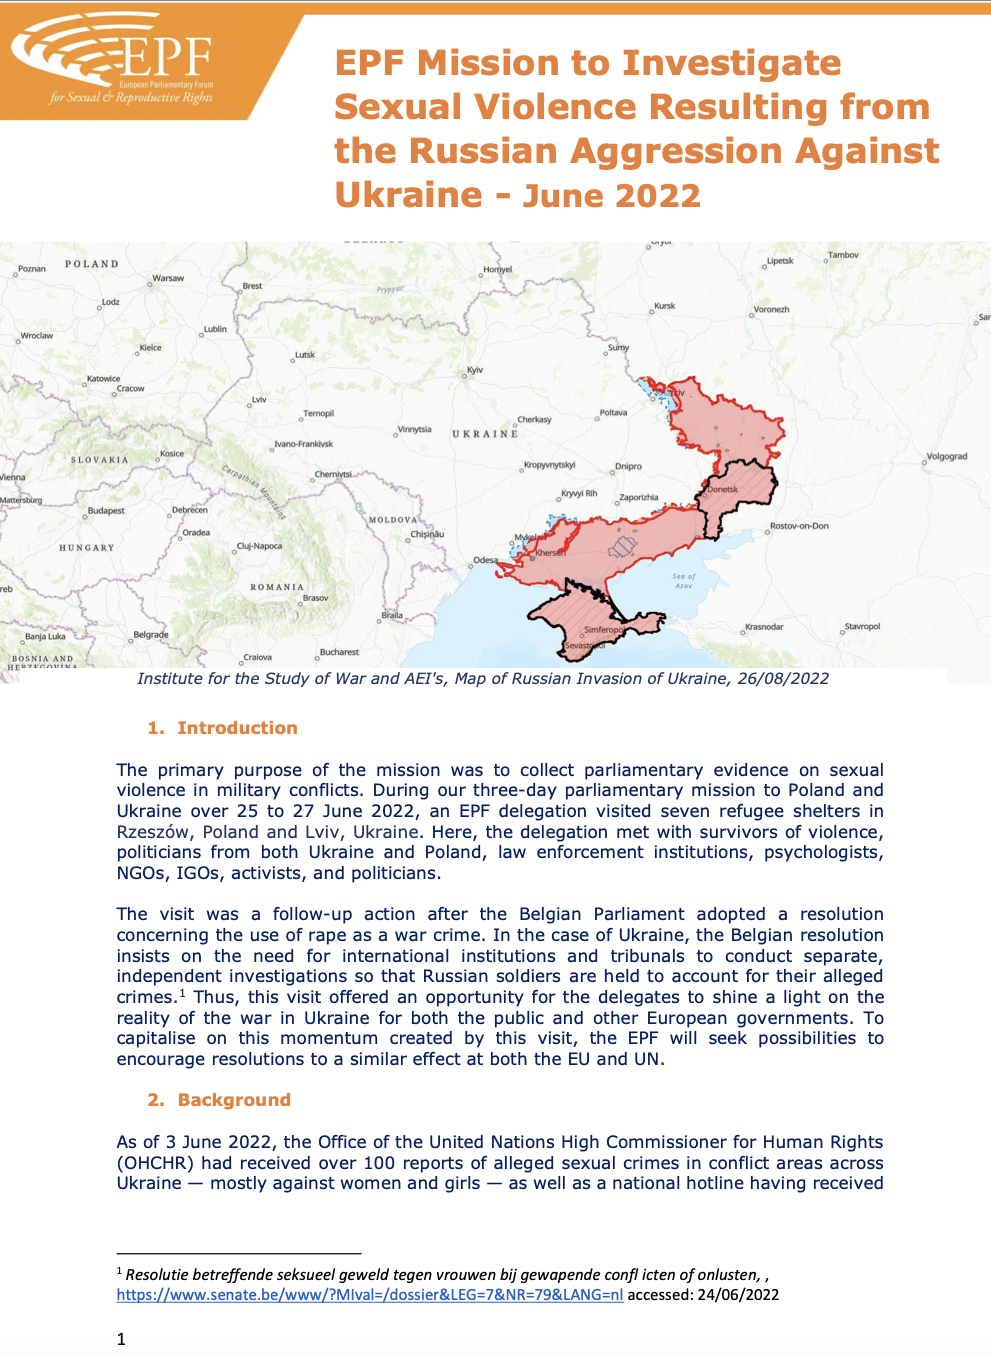 EPF Mission to Investigate Sexual Violence Resulting from the Russian Aggression Against Ukraine - June 2022